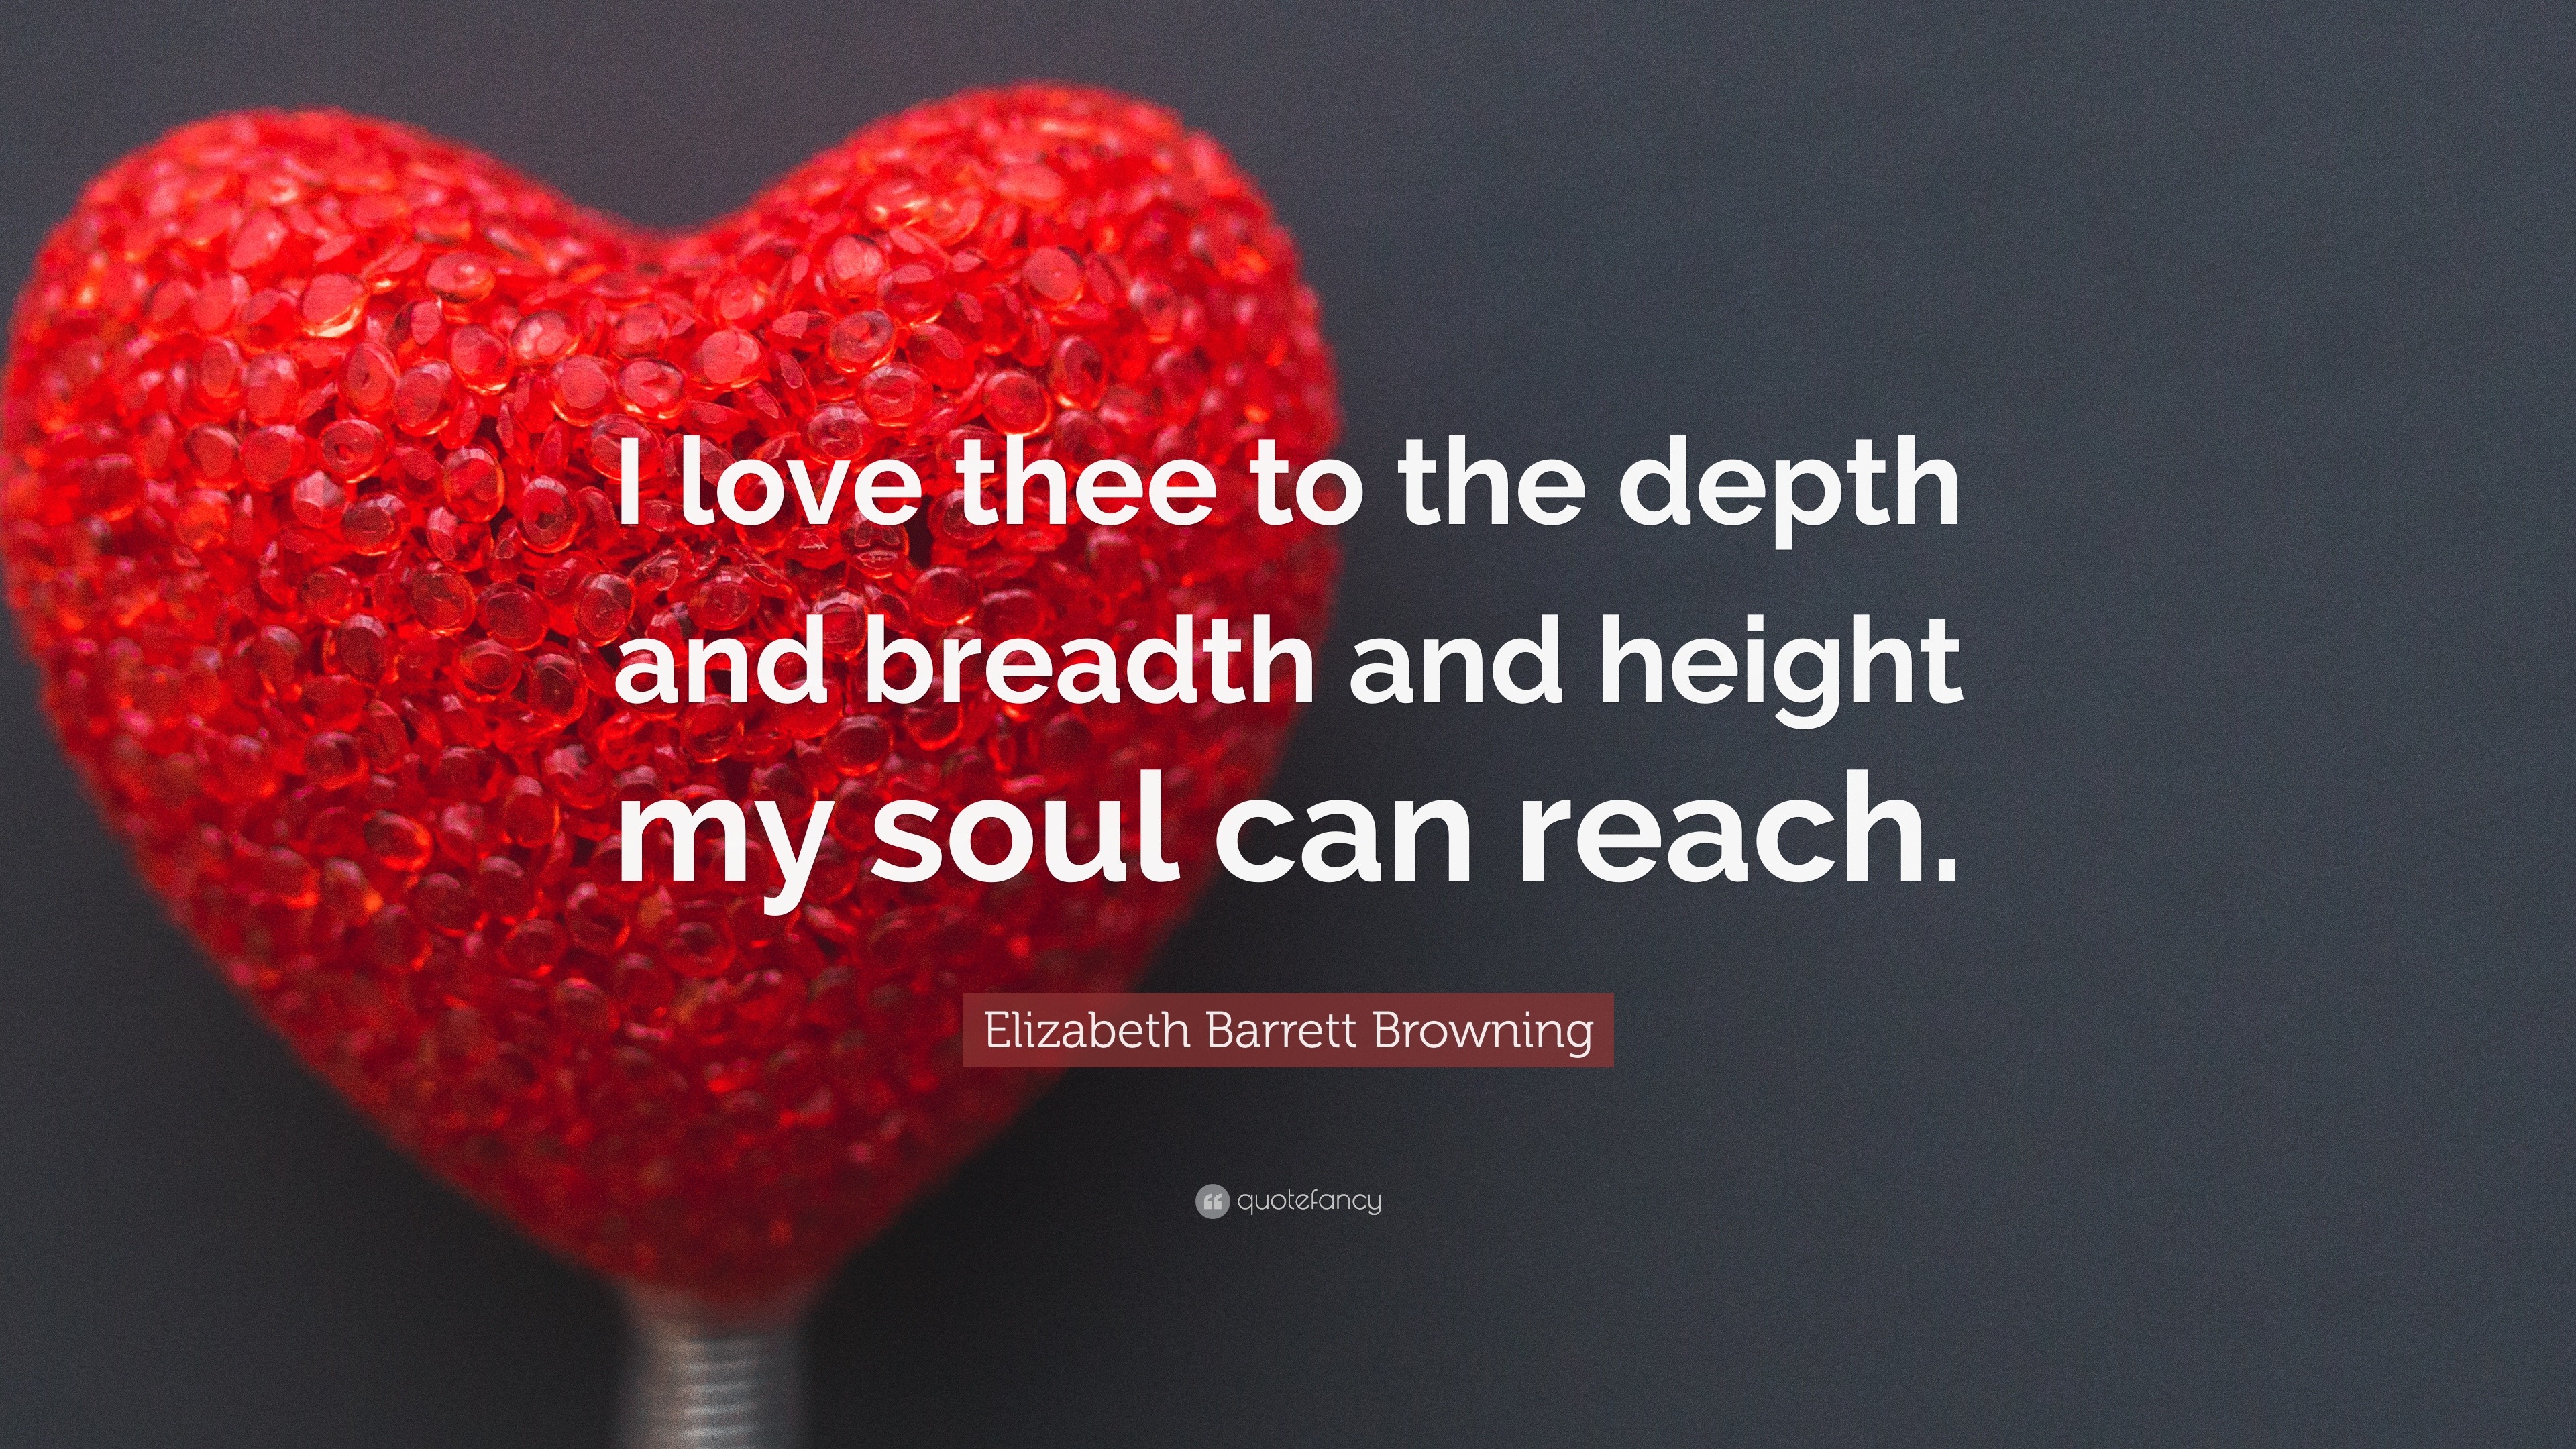 Top 180 Elizabeth Barrett Browning Quotes 21 Edition Free Images Quotefancy